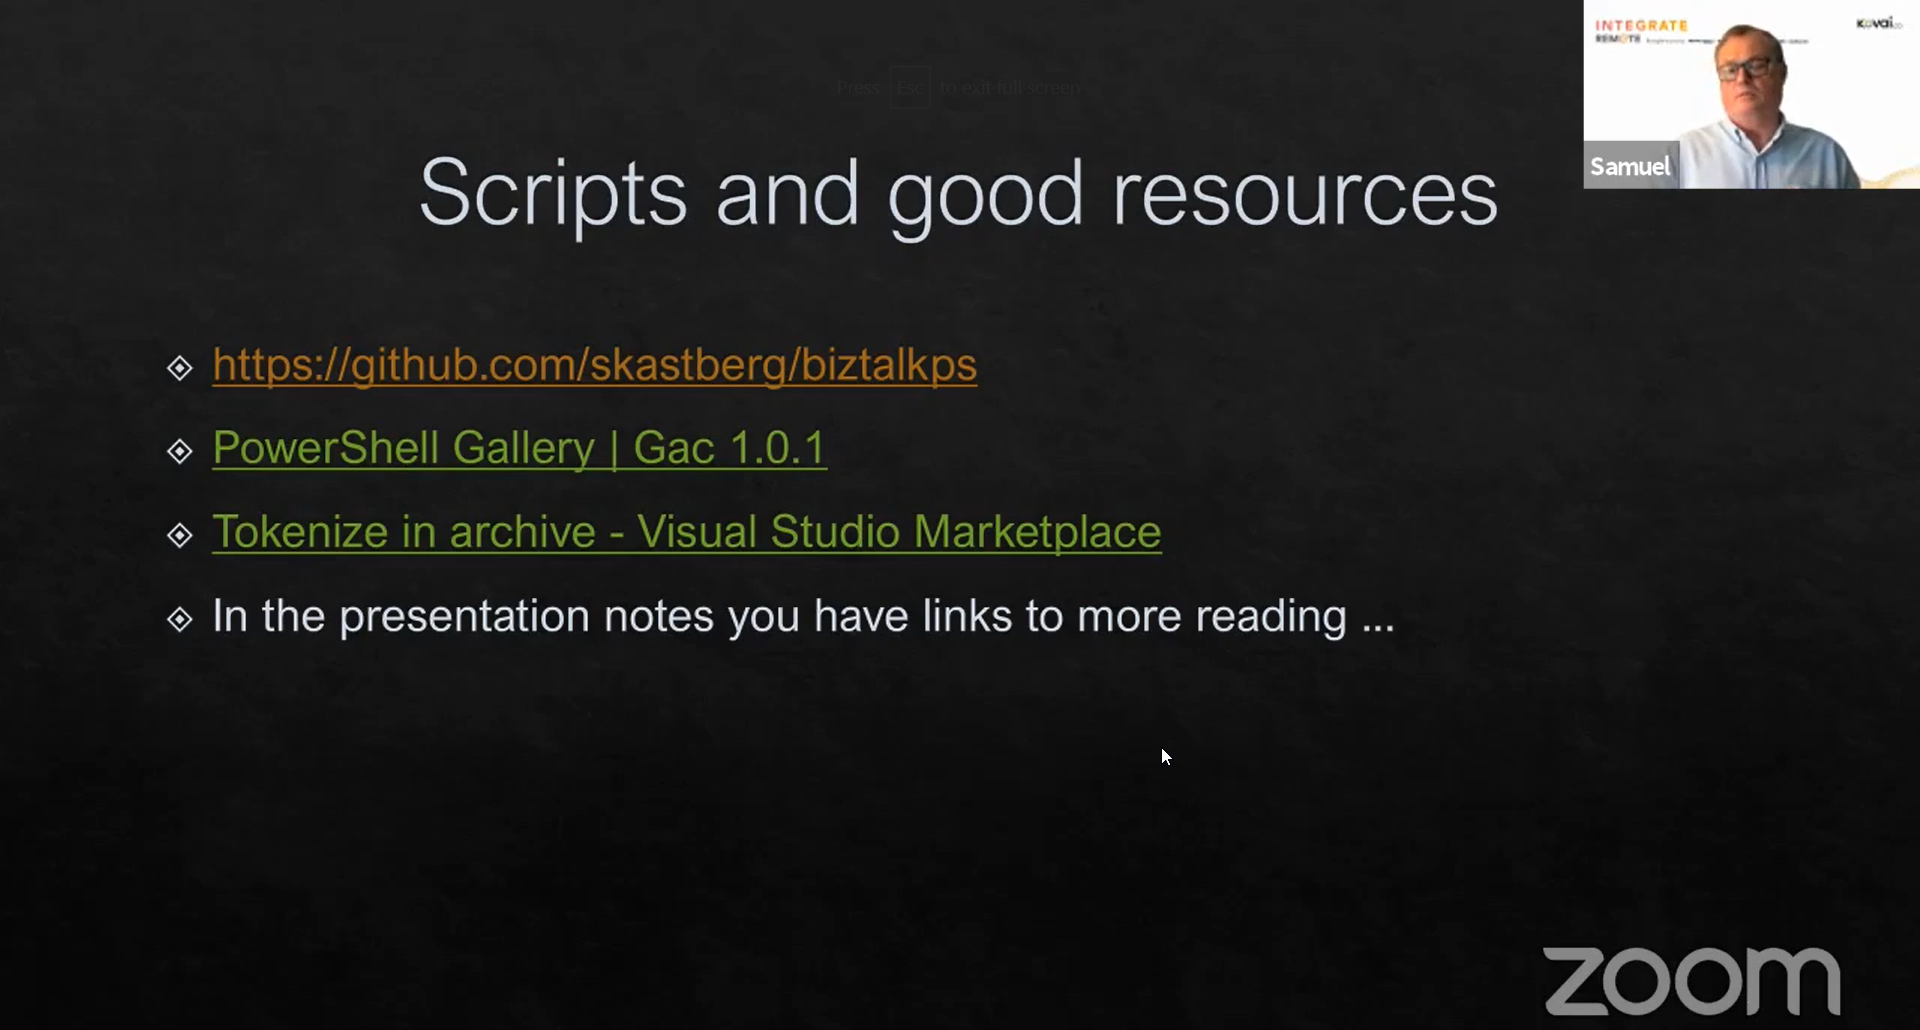 Scripts and resources